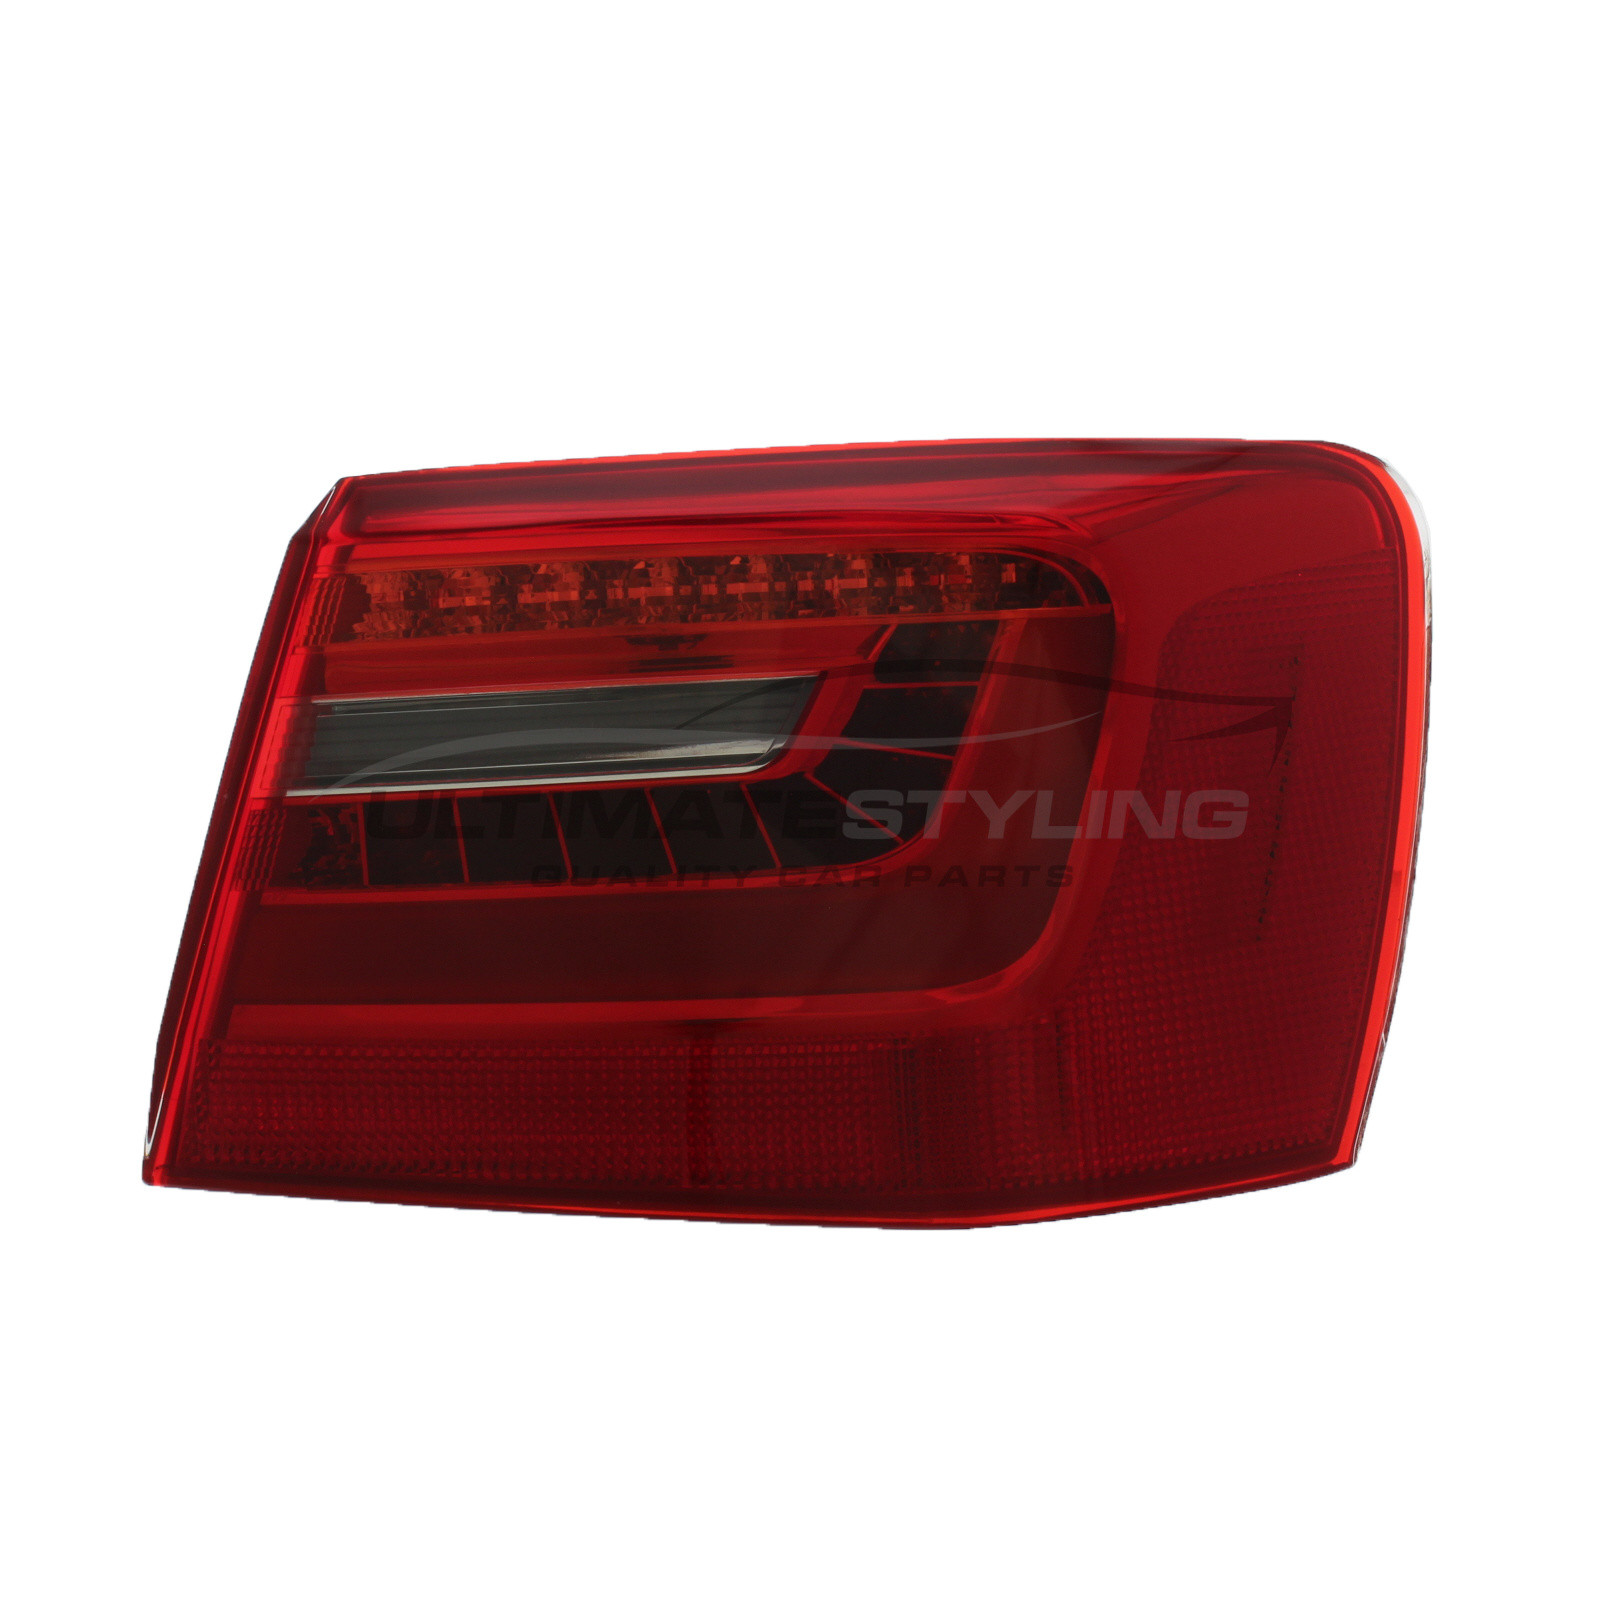 Audi A6 2011-2015 / Audi RS6 2013-2015 / Audi S6 2012-2015 LED Outer (Wing) Rear Light / Tail Light Including Bulb Holder Drivers Side (RH)